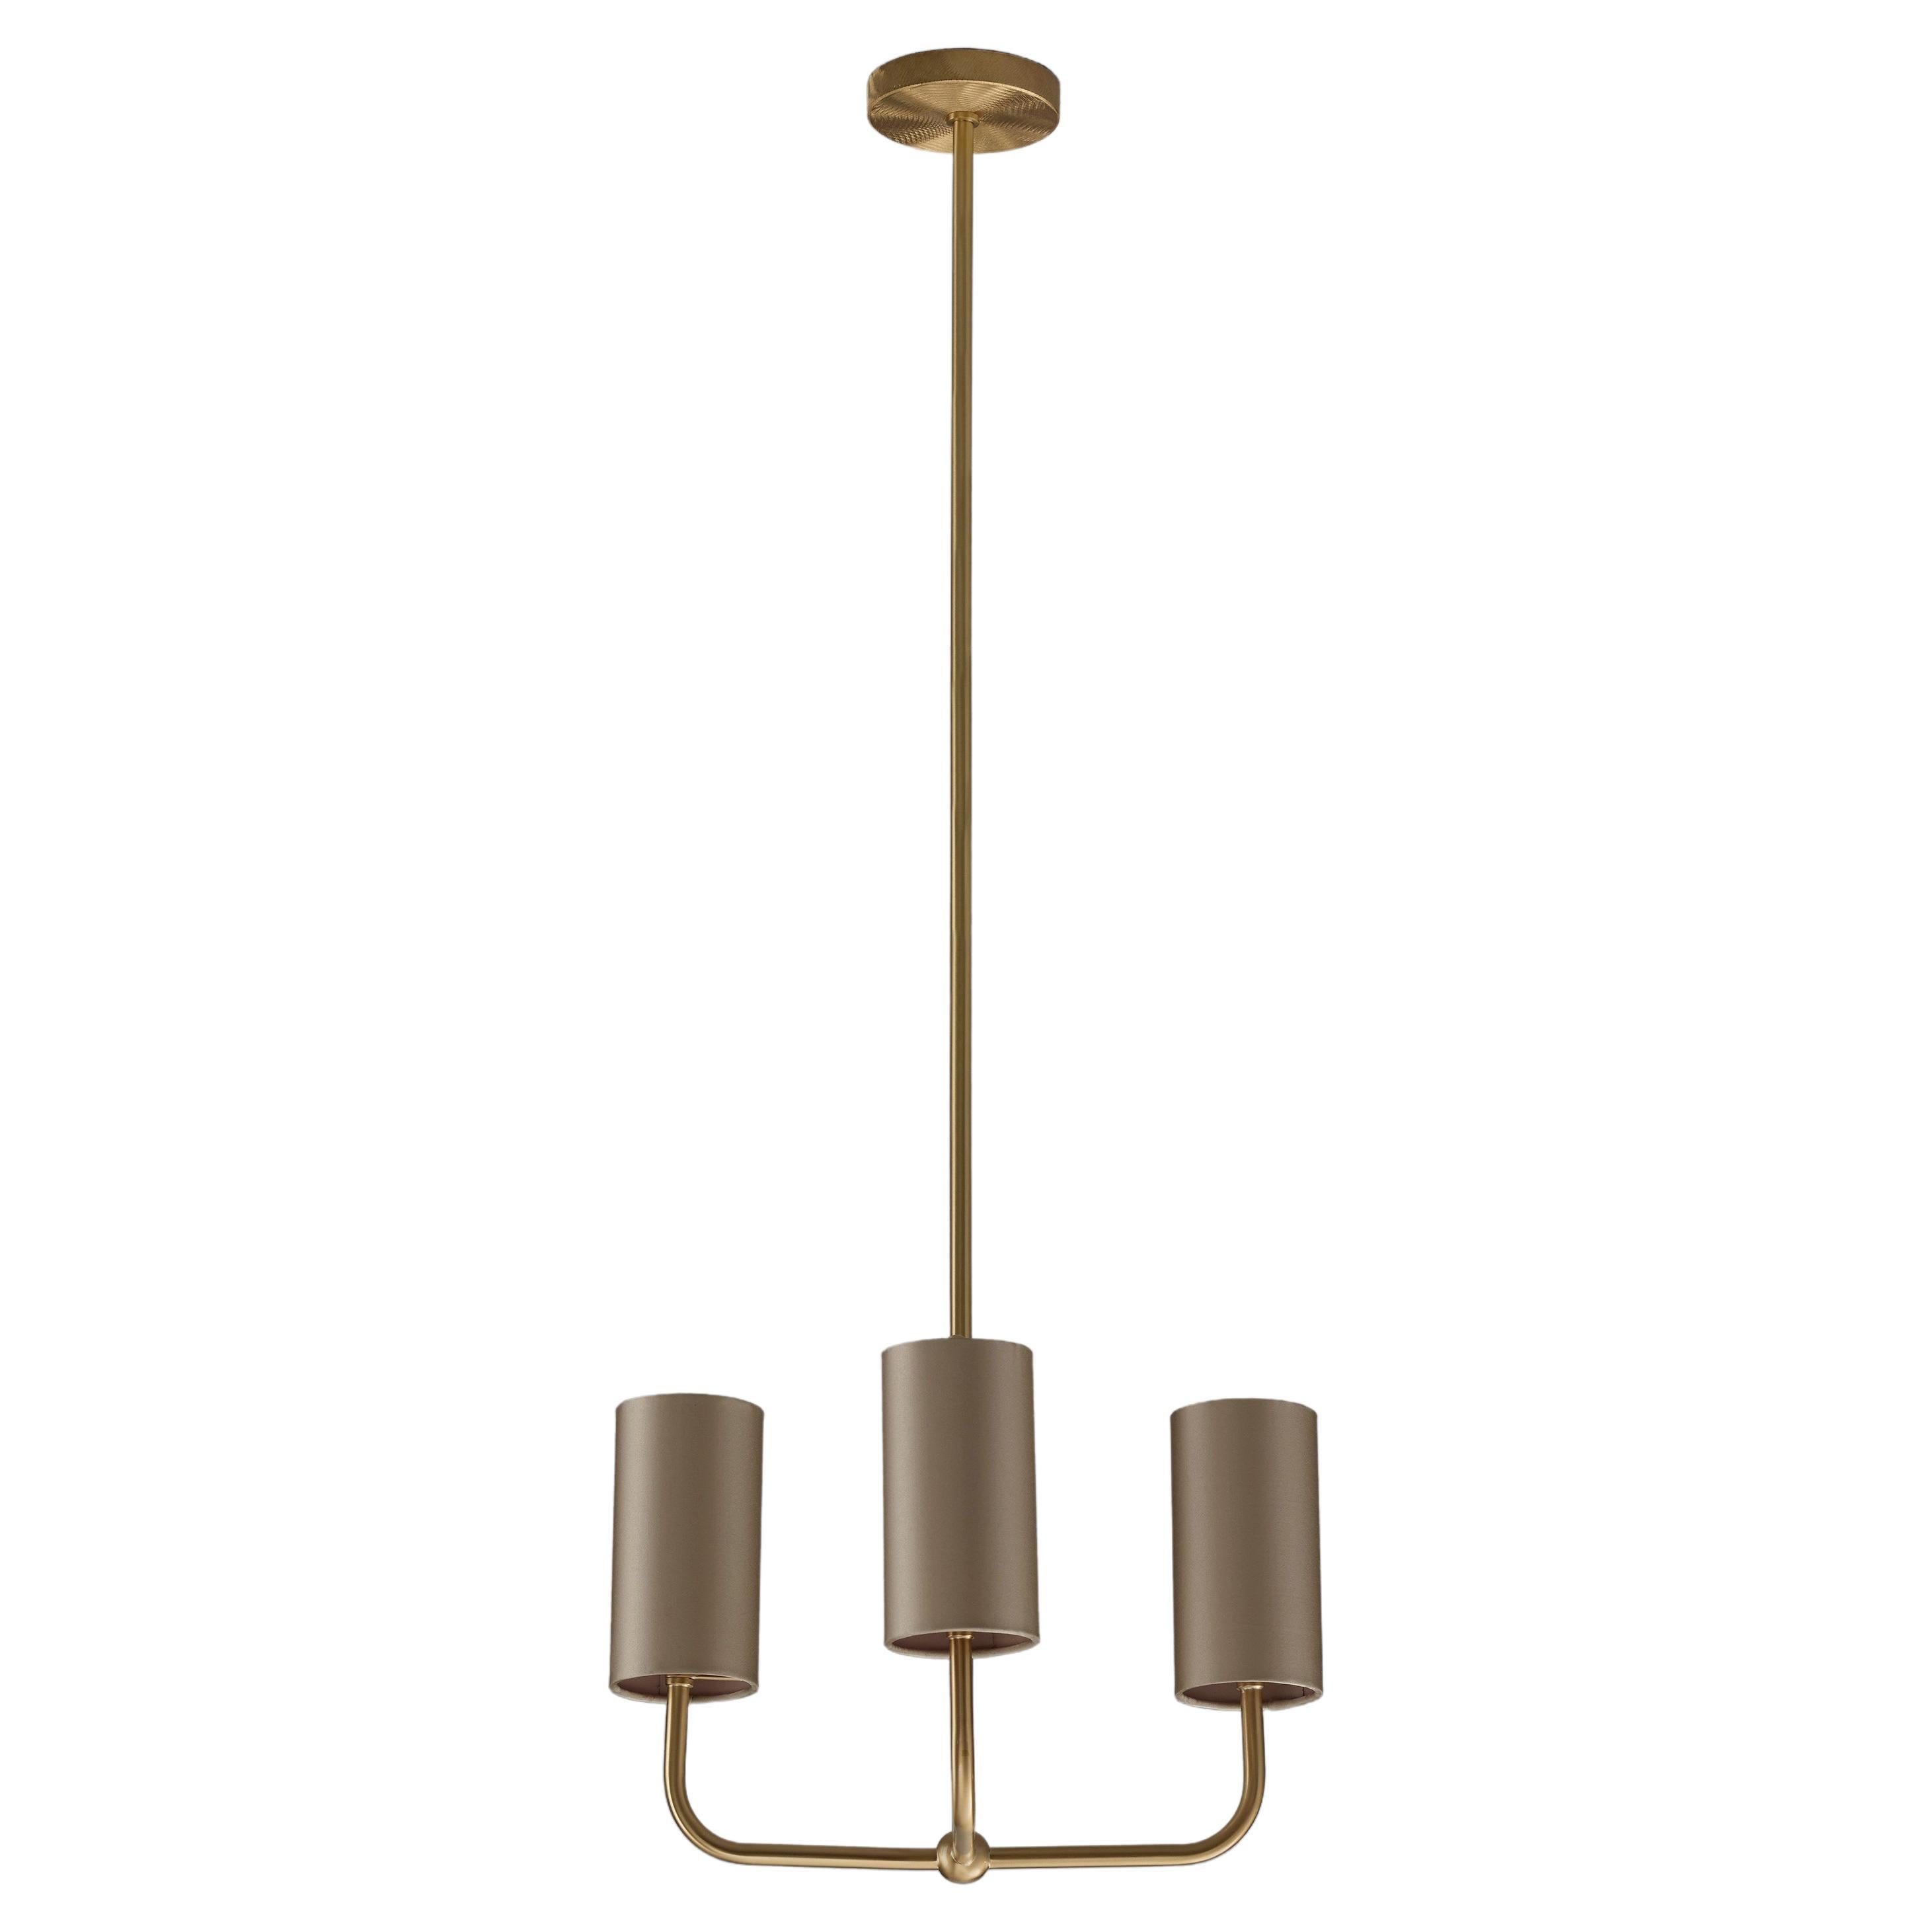 Imagin Classic Pendant Light 2 in Brushed Brass and Fabric Shade For Sale